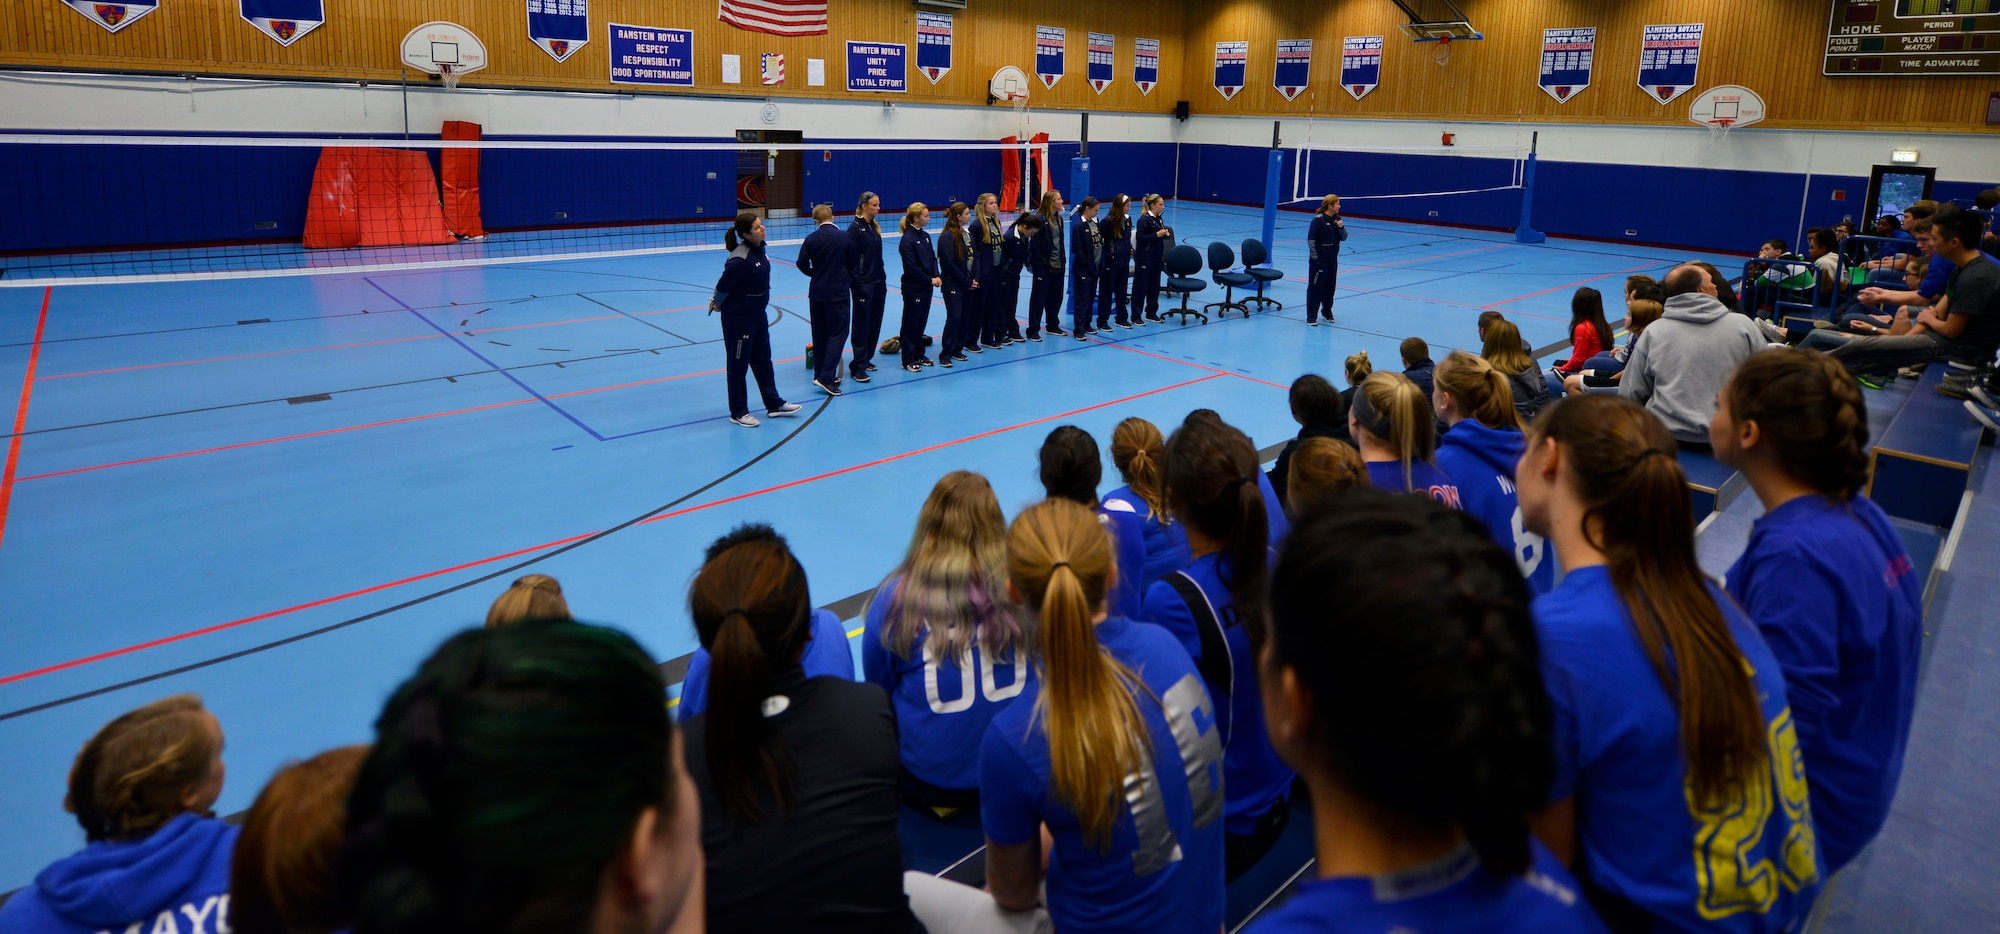 Students from Ramstein High School listen to members of the University of Notre Dame softball team during their visit to the school Oct. 21, 2015, at Ramstein Air Base, Germany. Notre Dame players held softball clinics with varsity softball players from both Ramstein and Kaiserslautern High Schools. (U.S. Air Force photo/Staff Sgt. Sharida Jackson)